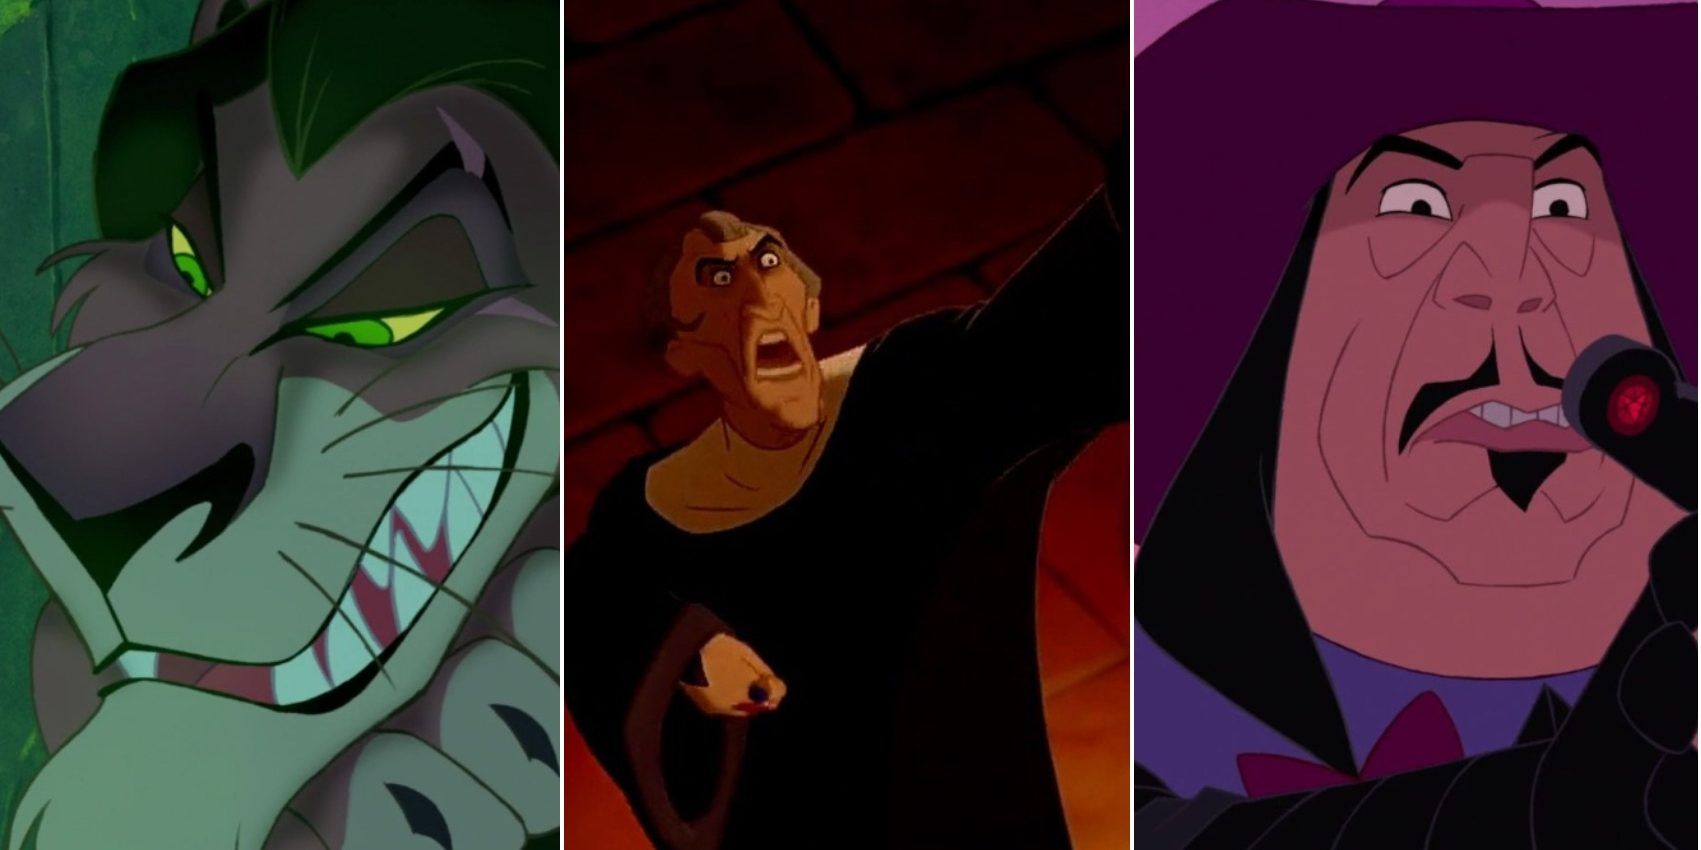 Disney 10 Villains That Would Be Impossible to Create Today